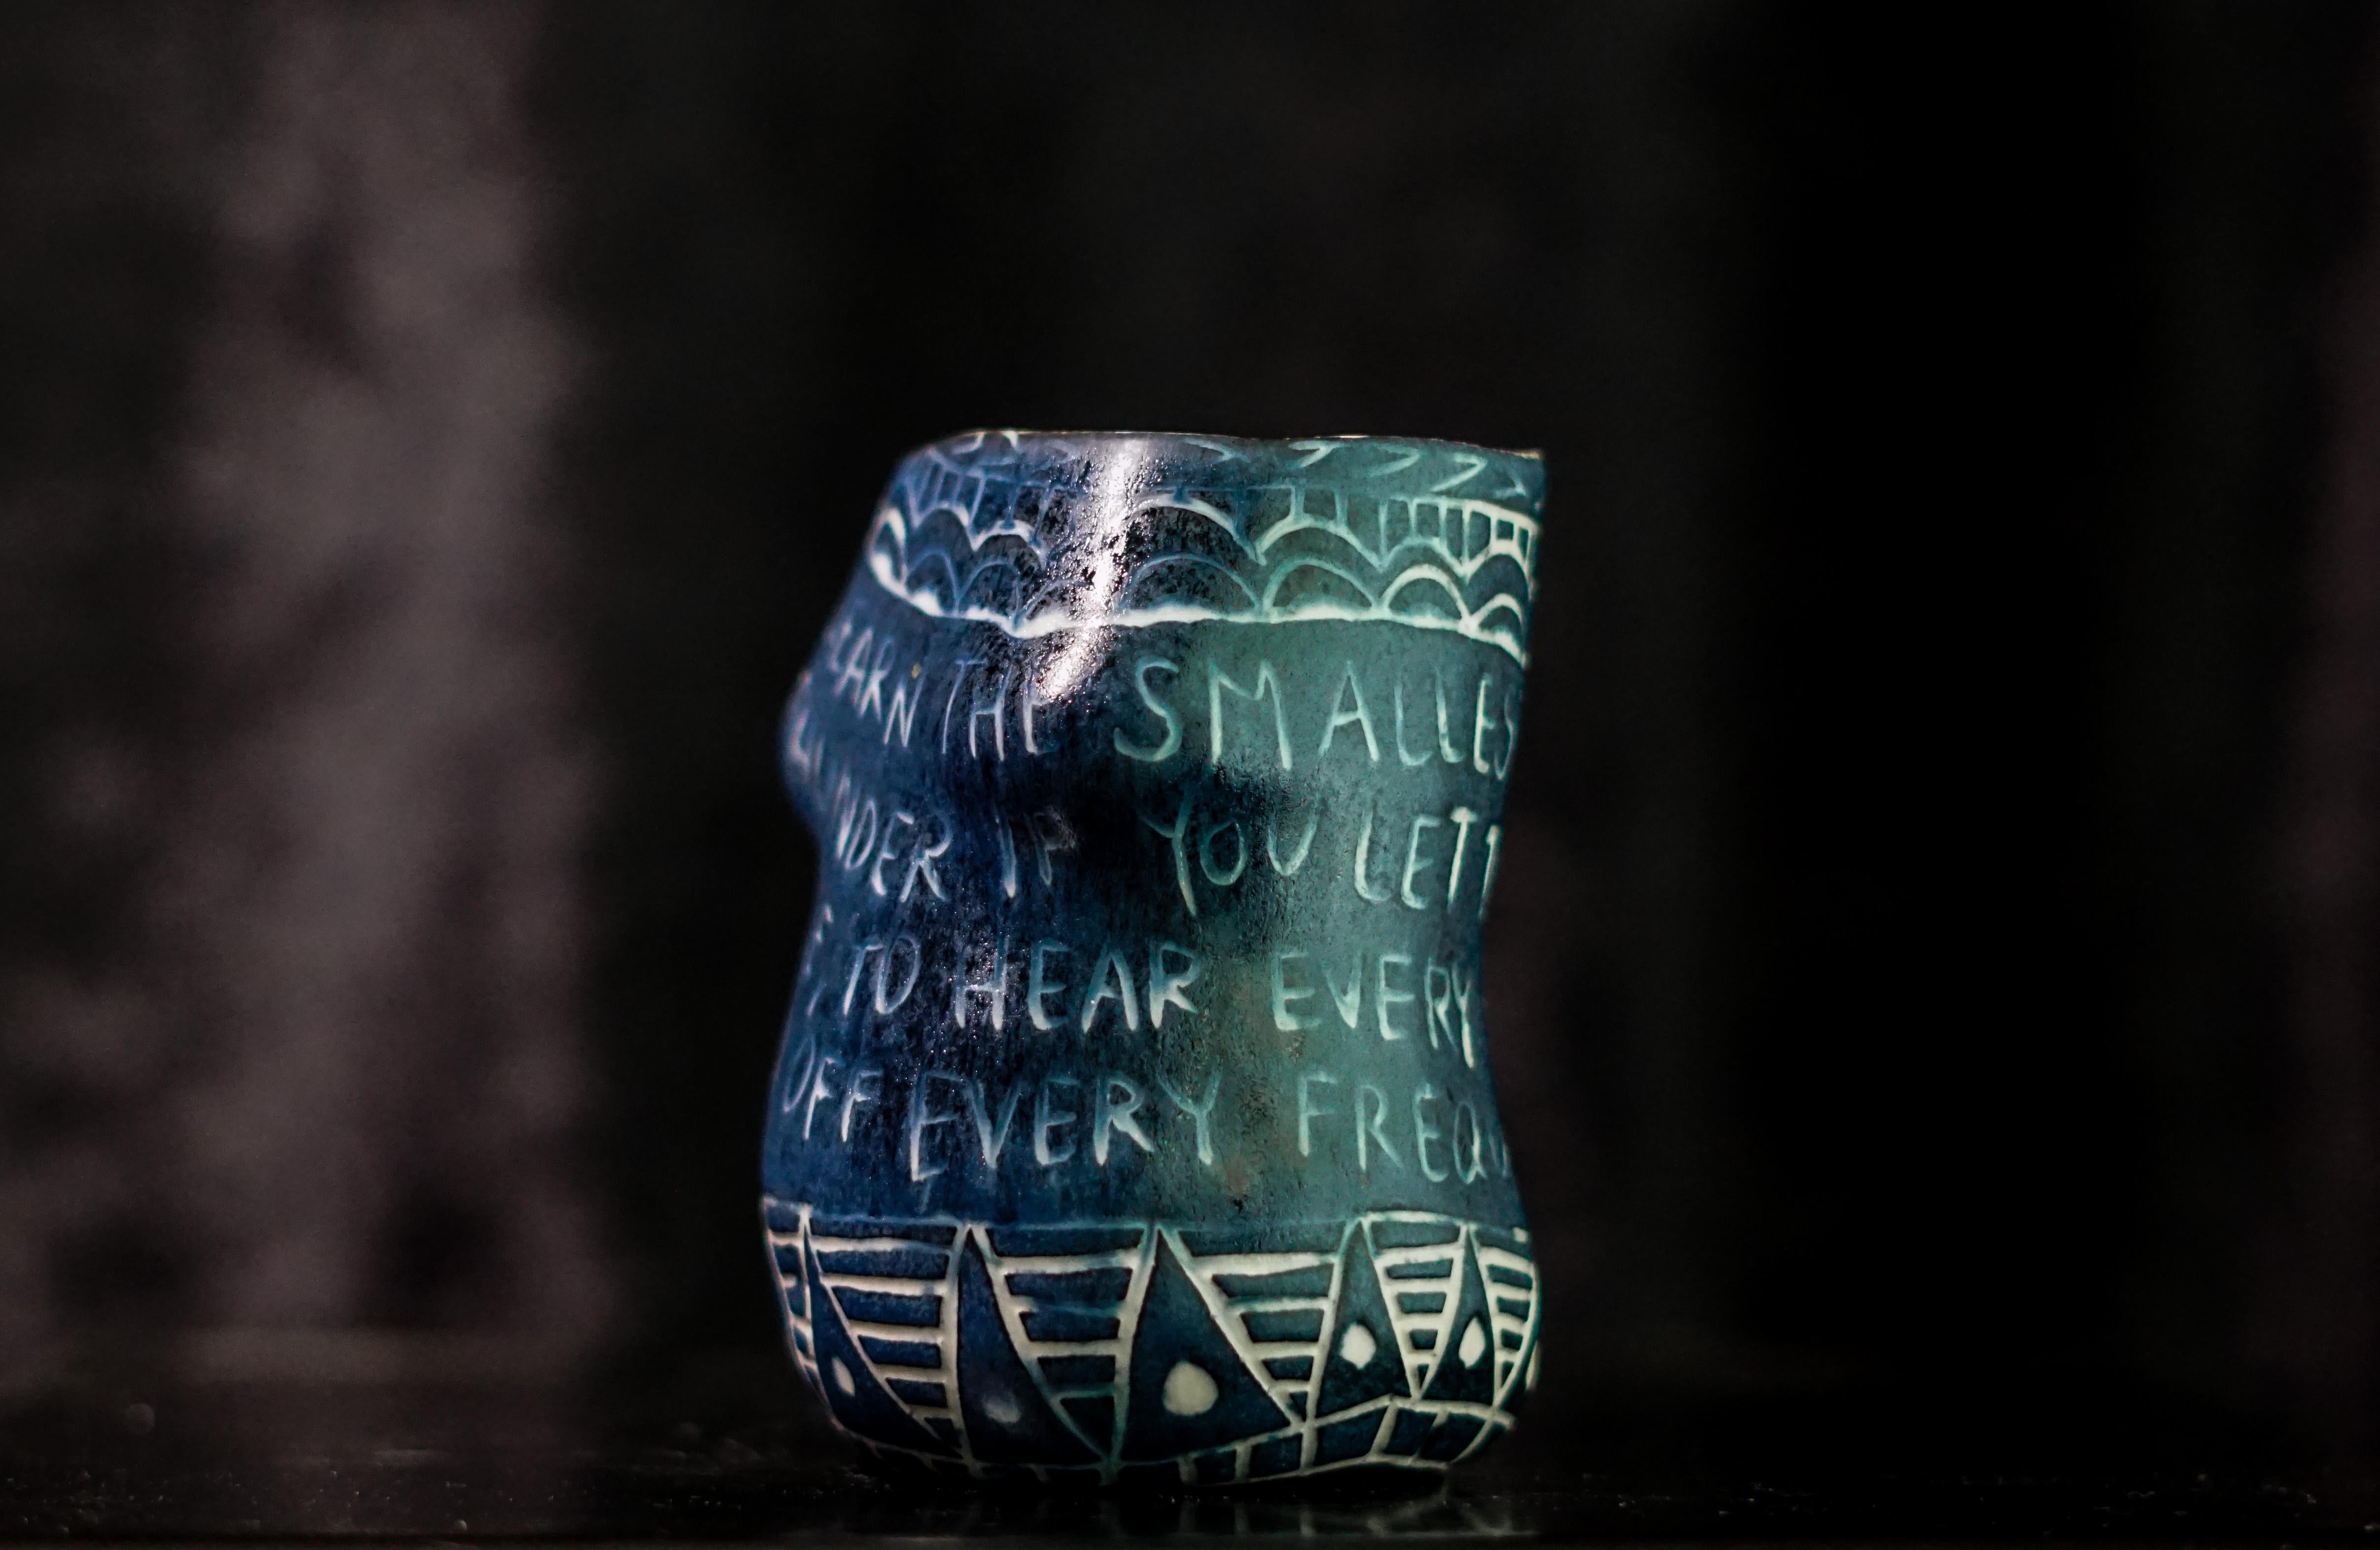 “Here I Learn..” Porcelain cup with sgraffito detailing by the artist - Modern Sculpture by Alex Hodge